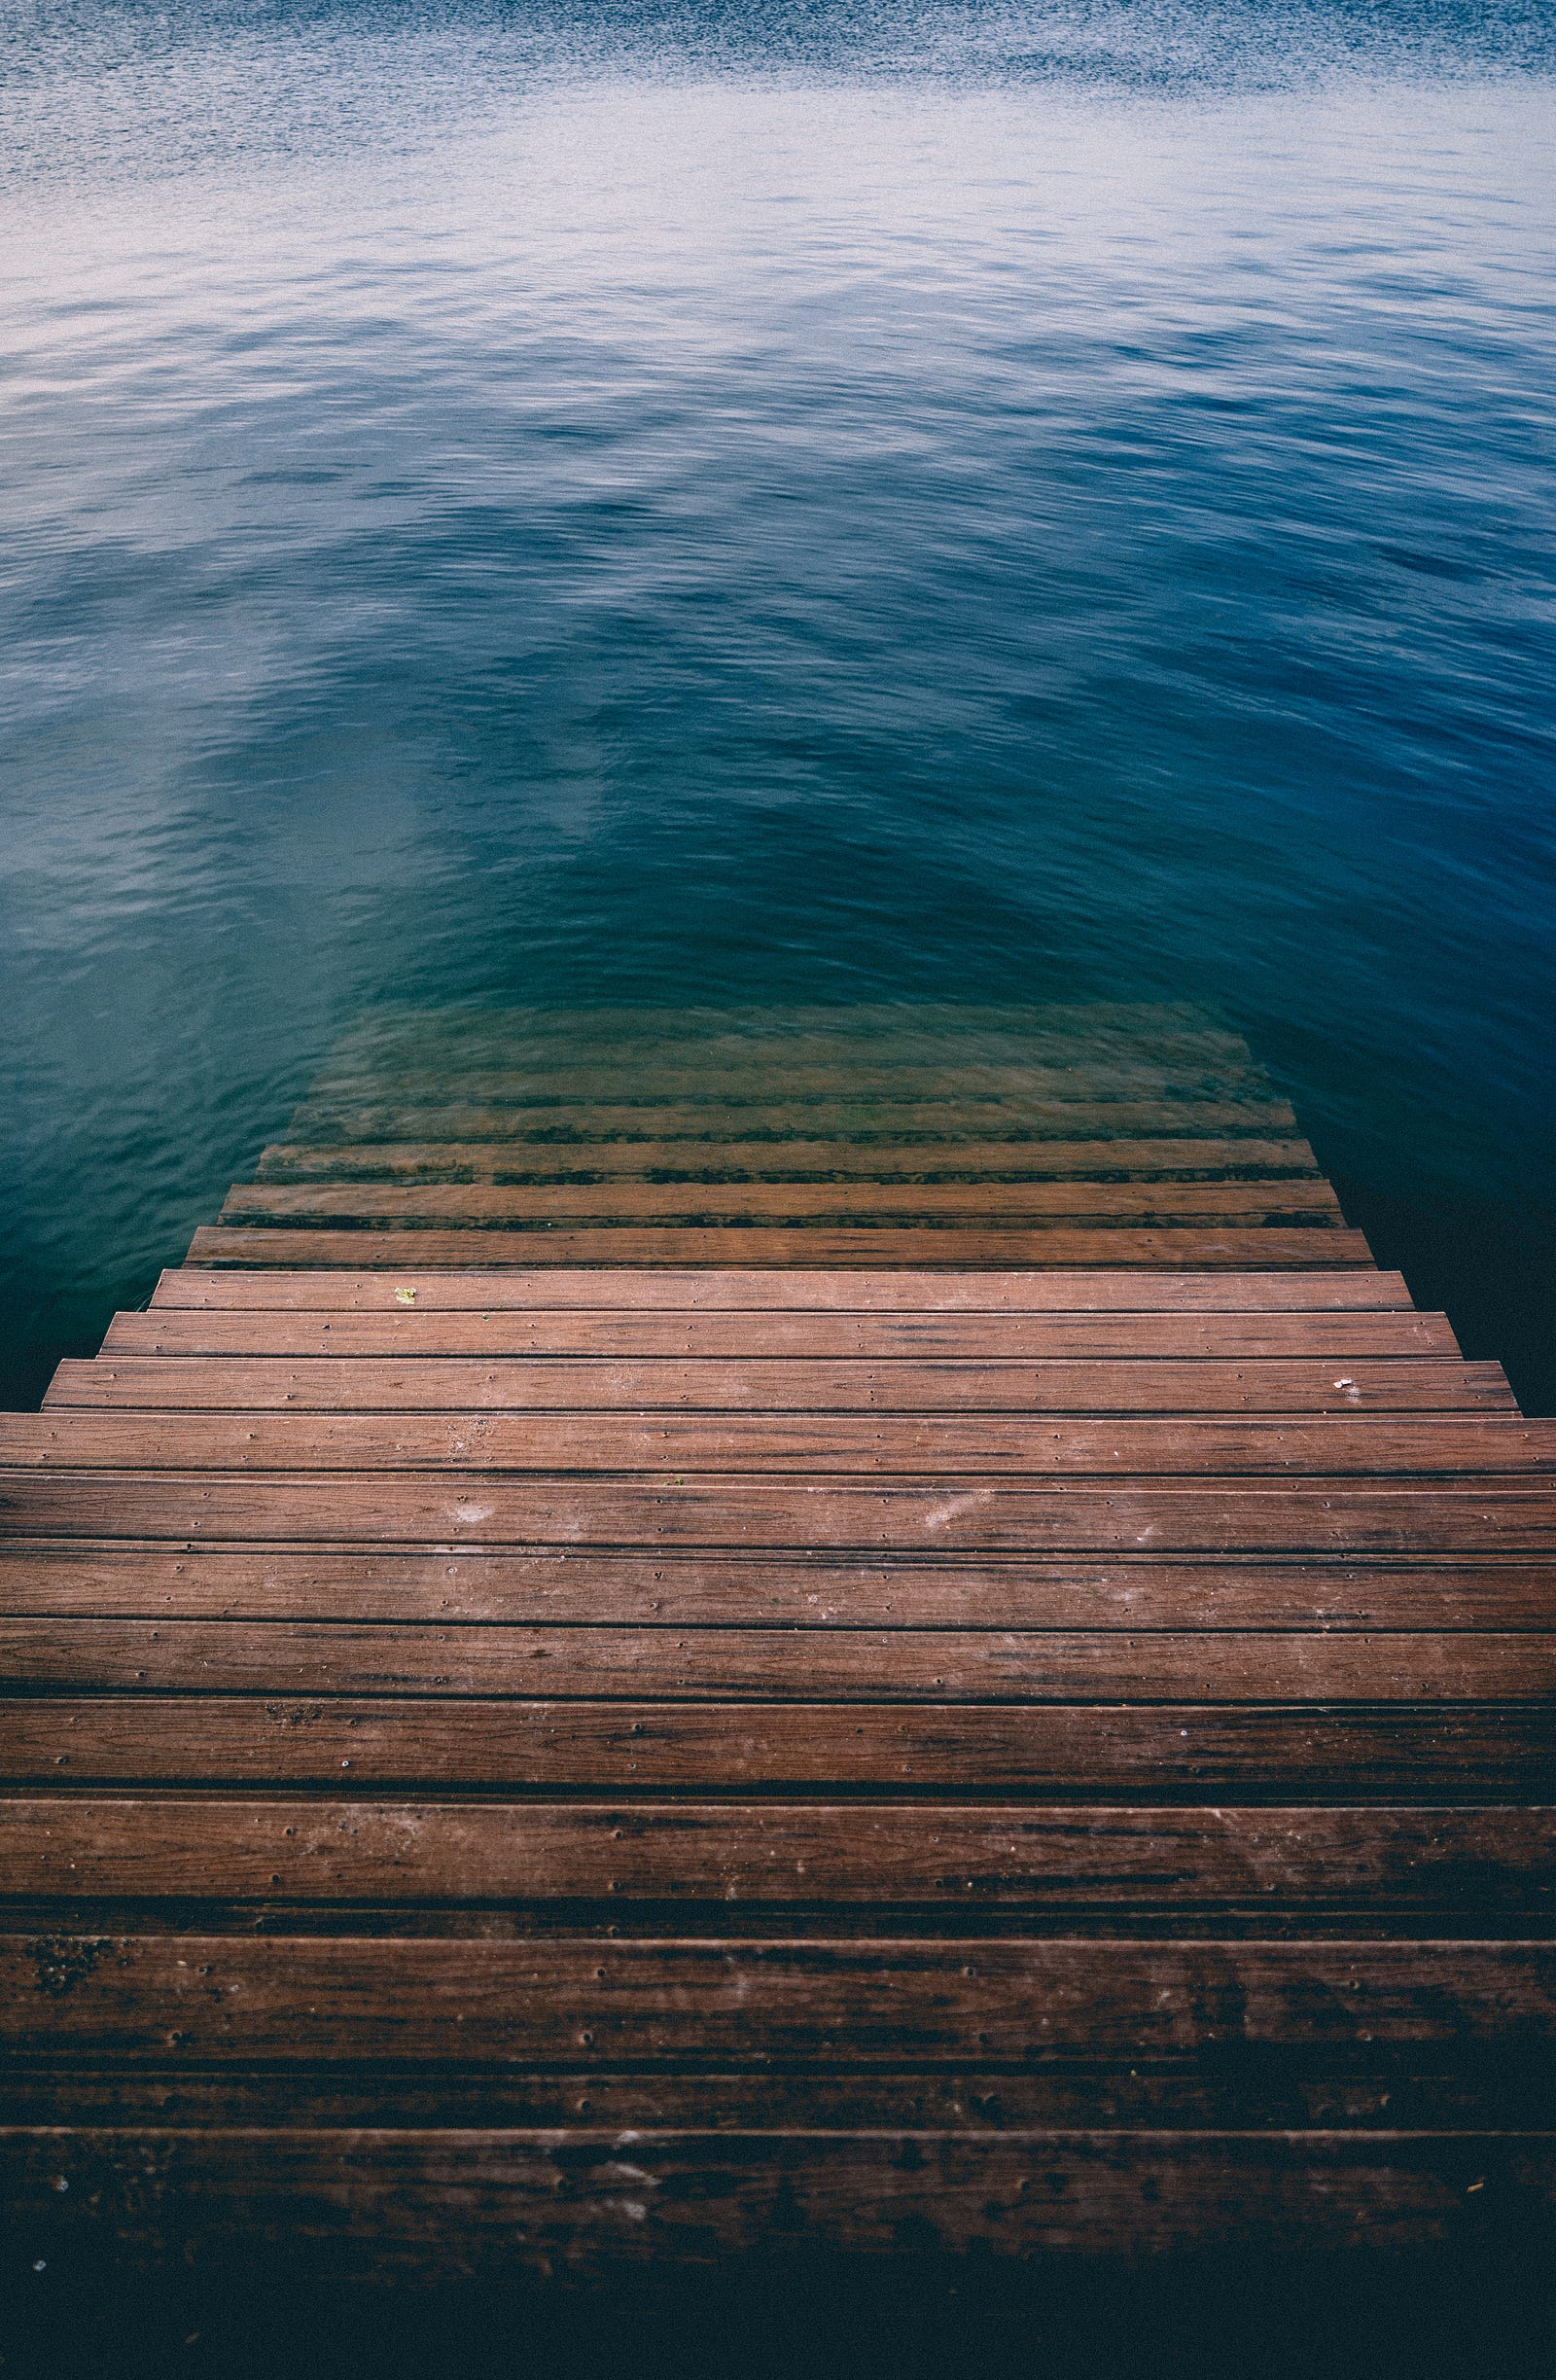 Wooden stairs descend steeply into a body of water. Researchers recently reported that daily climbing of more than five flights of stairs was associated with over a one-fifth lower risk of atherosclerotic cardiovascular disease (ASCVD).